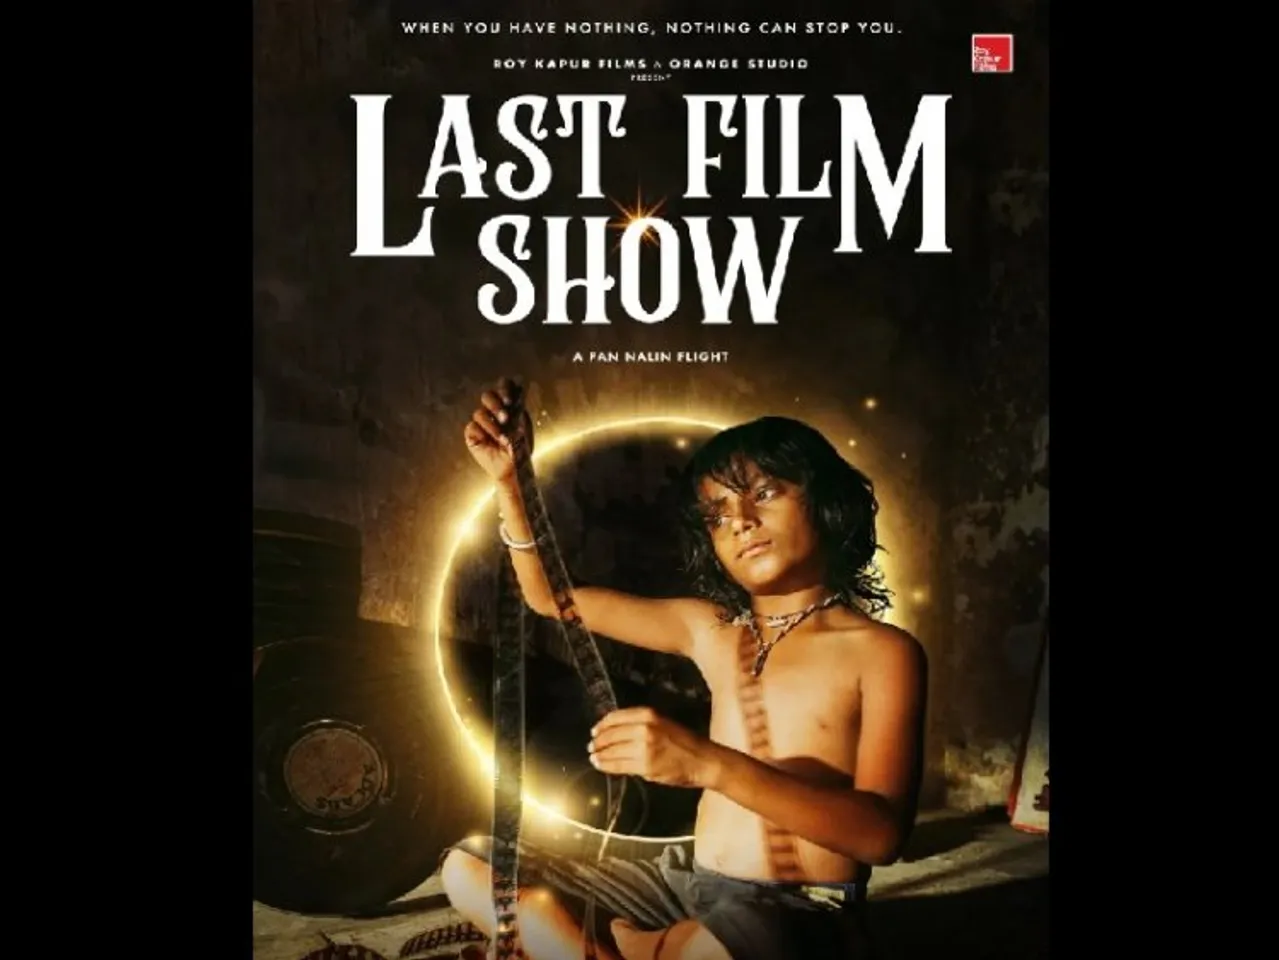 Siddharth Roy Kapur to release Pan Nalin's 'Last Film Show' in India